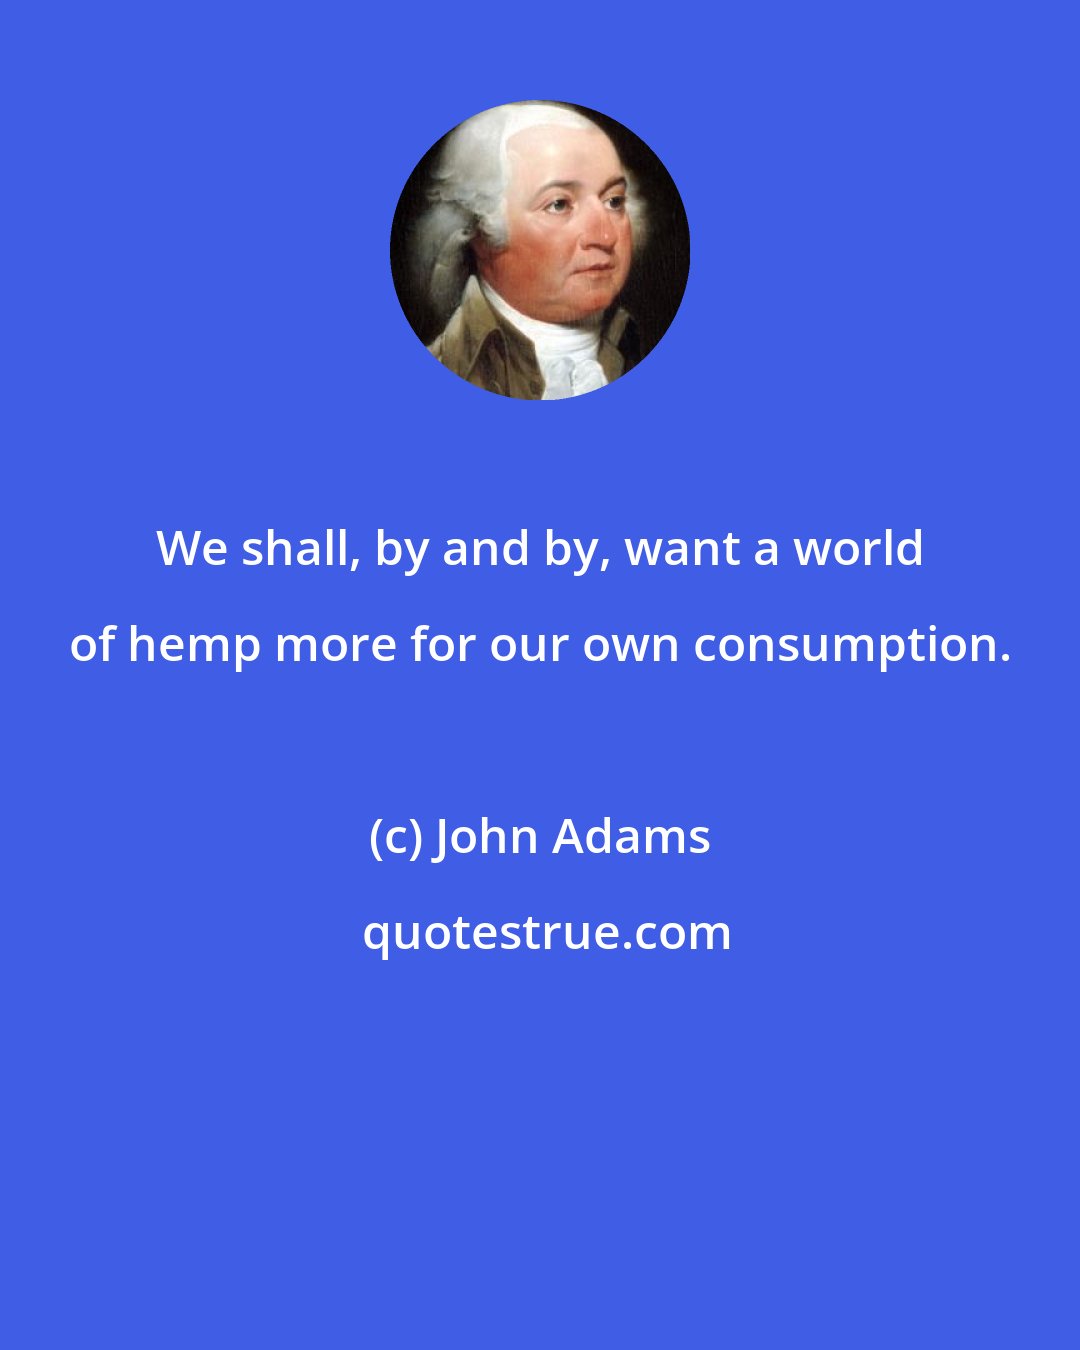 John Adams: We shall, by and by, want a world of hemp more for our own consumption.